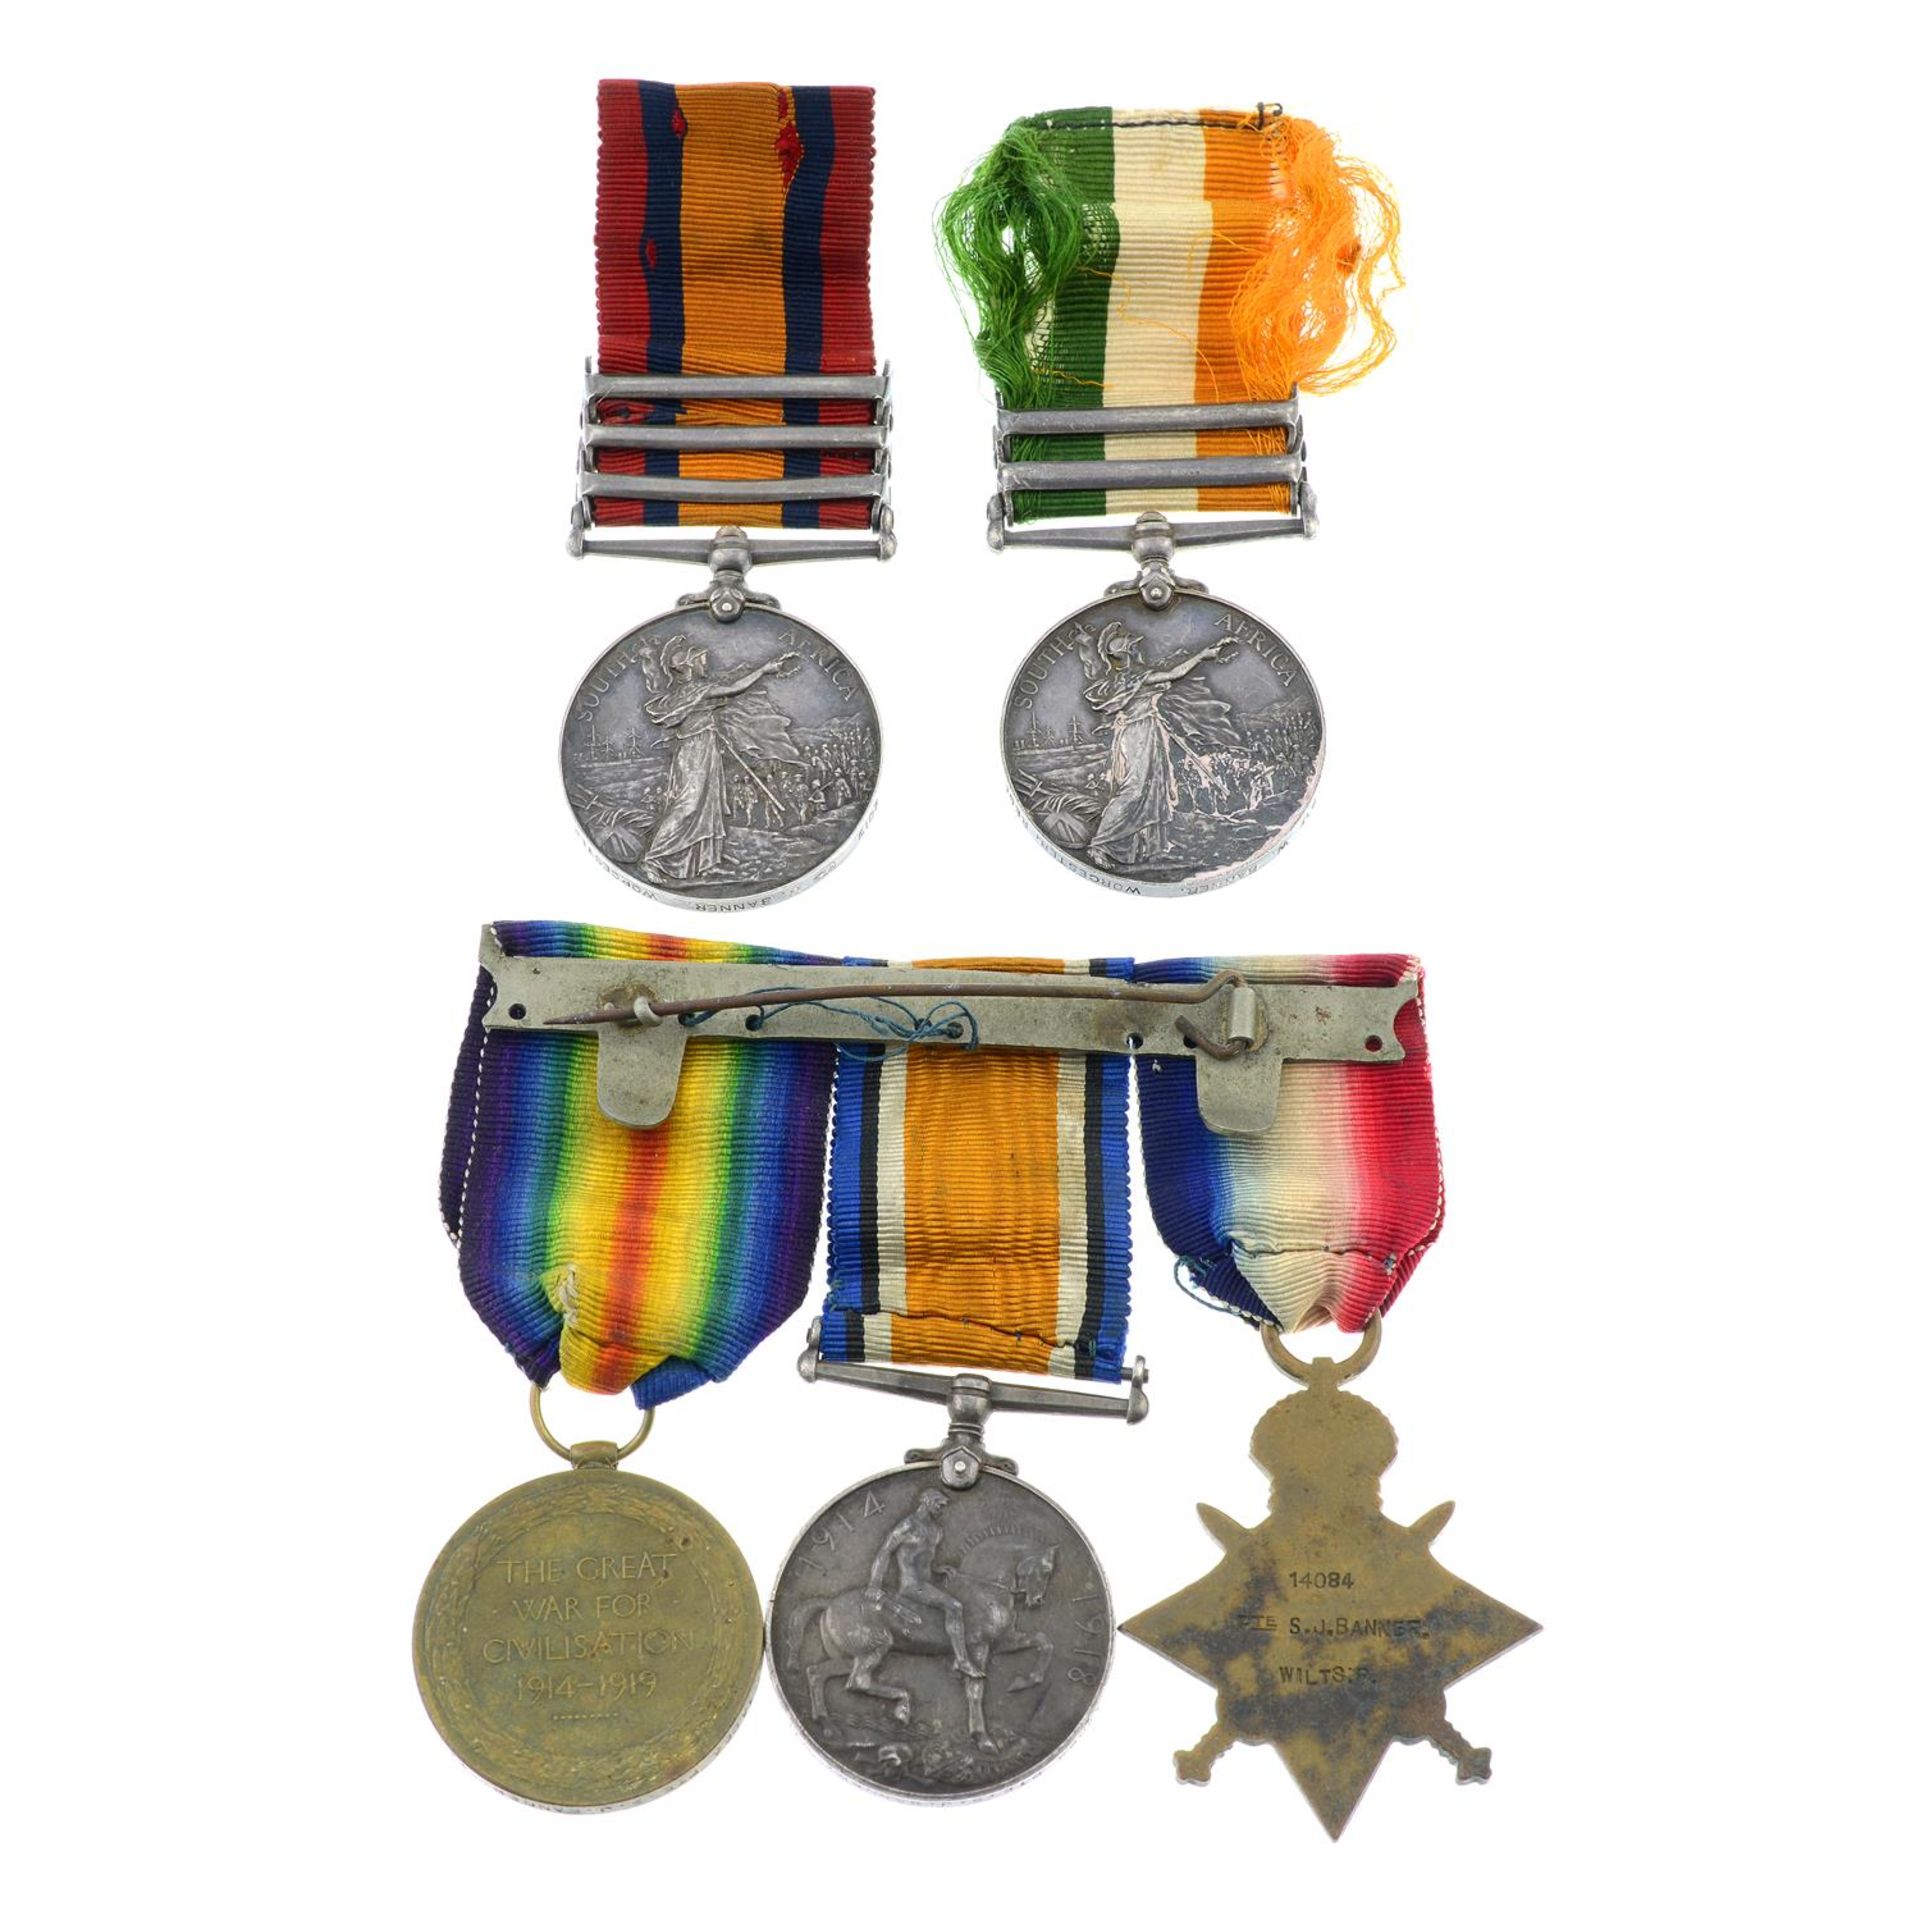 A Queens South Africa Medal & Kings South Africa Medal, together with a Great War Trio. - Image 2 of 4